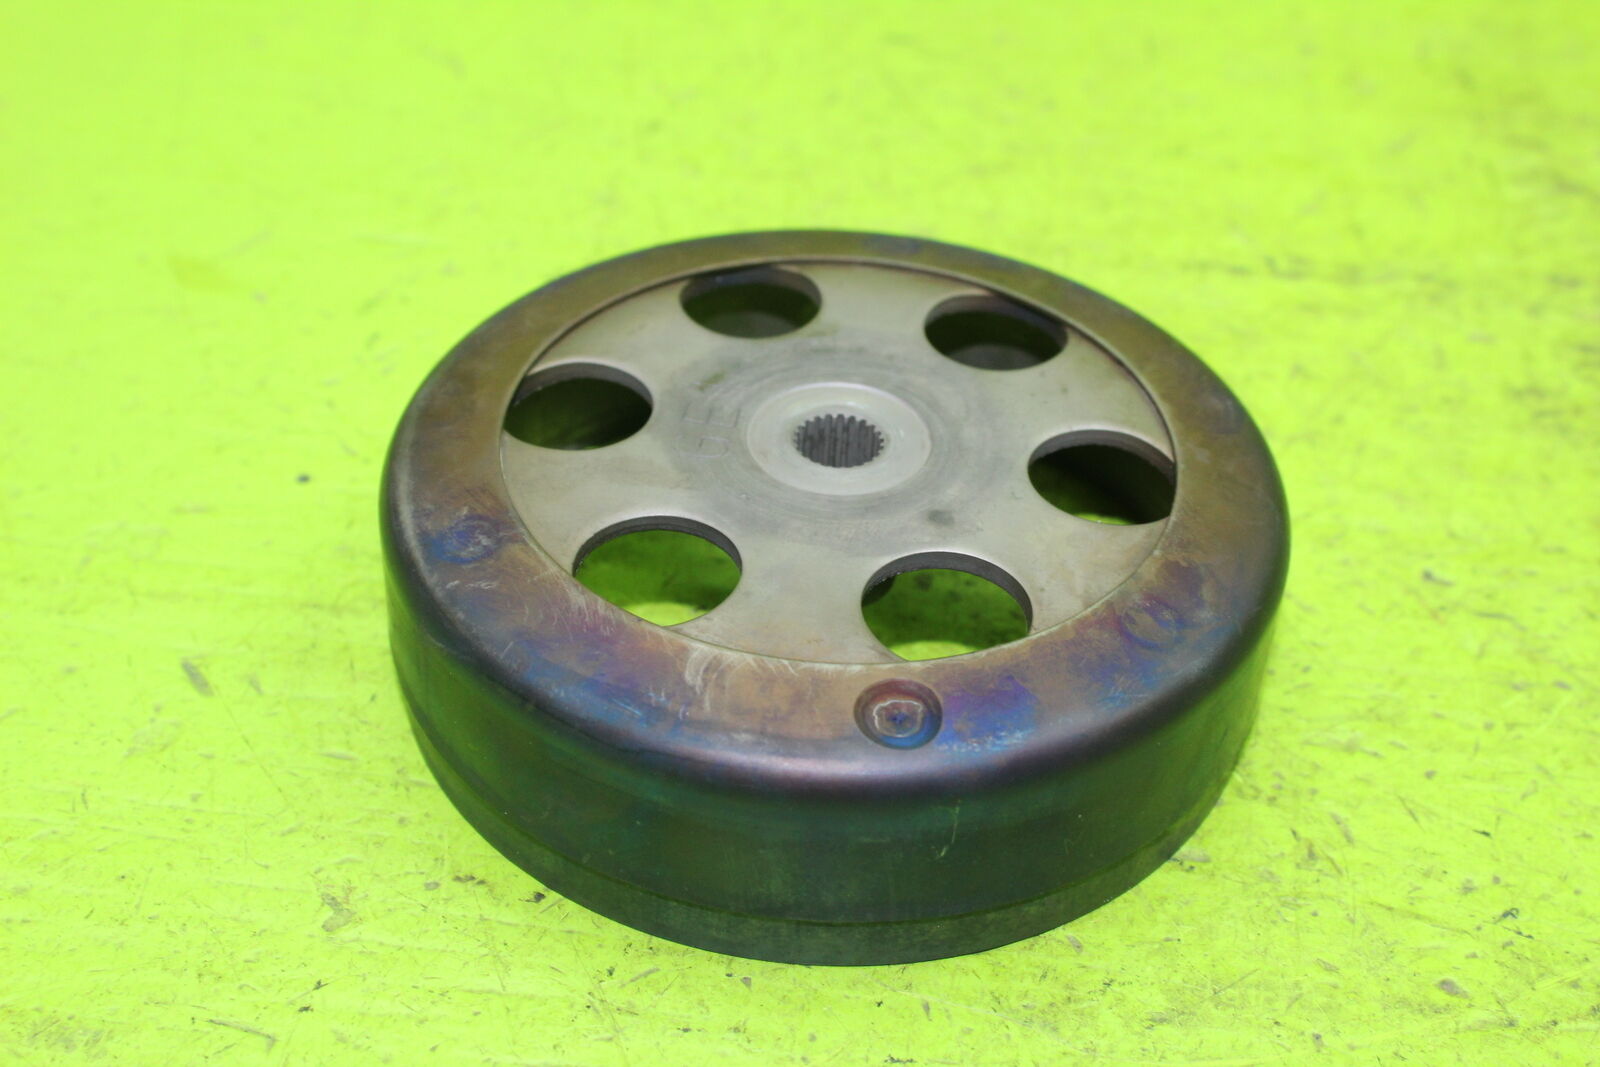 HONDA ELITE 80 OEM Complete Max 55% OFF Free Shipping CLUTCH DRUM BELL 22100-GR0-000 HOUSING MH54